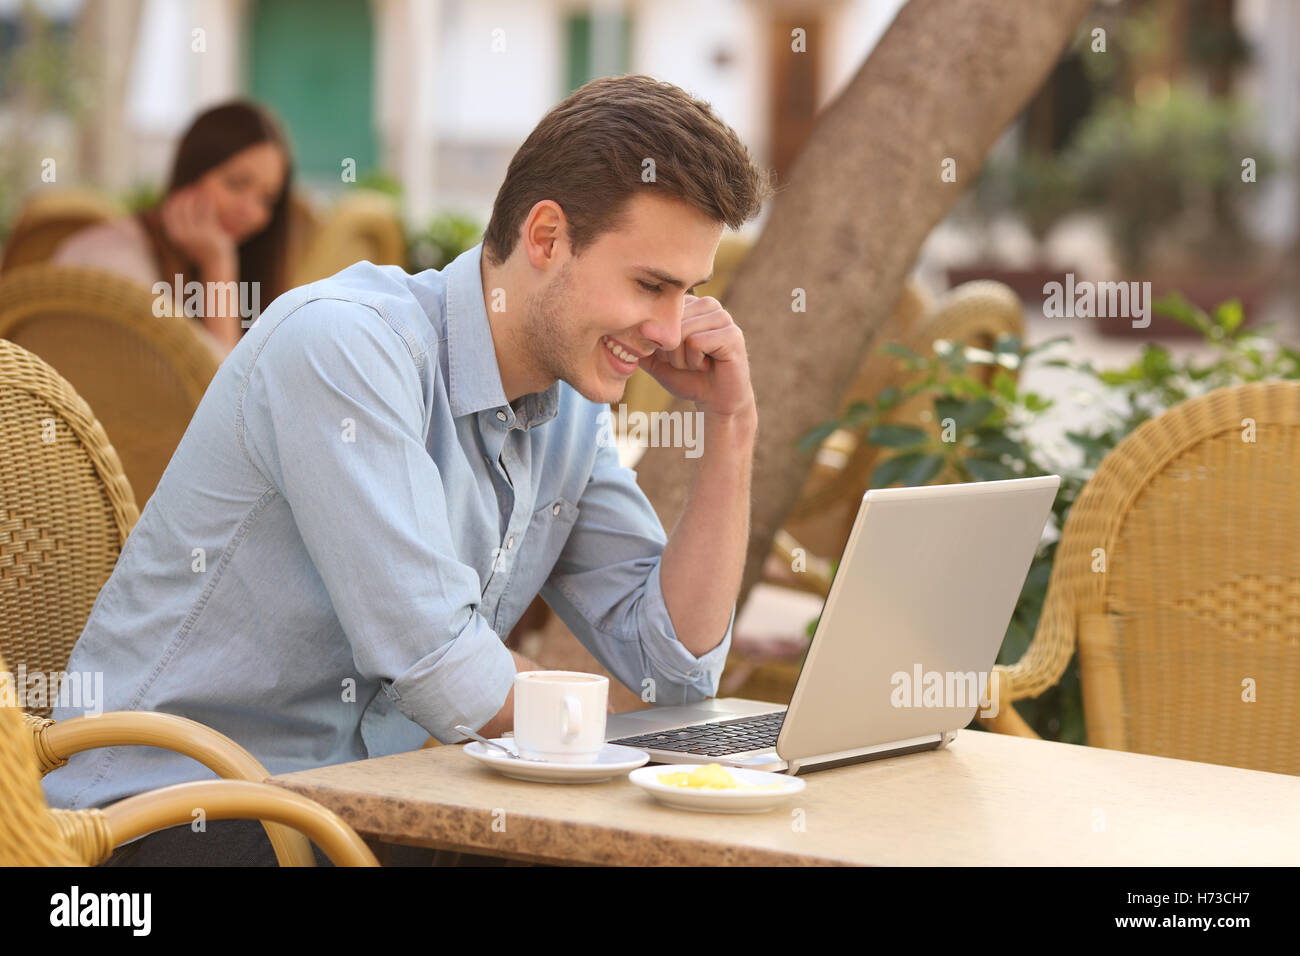 Man watching media in a laptop in a restaurant Stock Photo